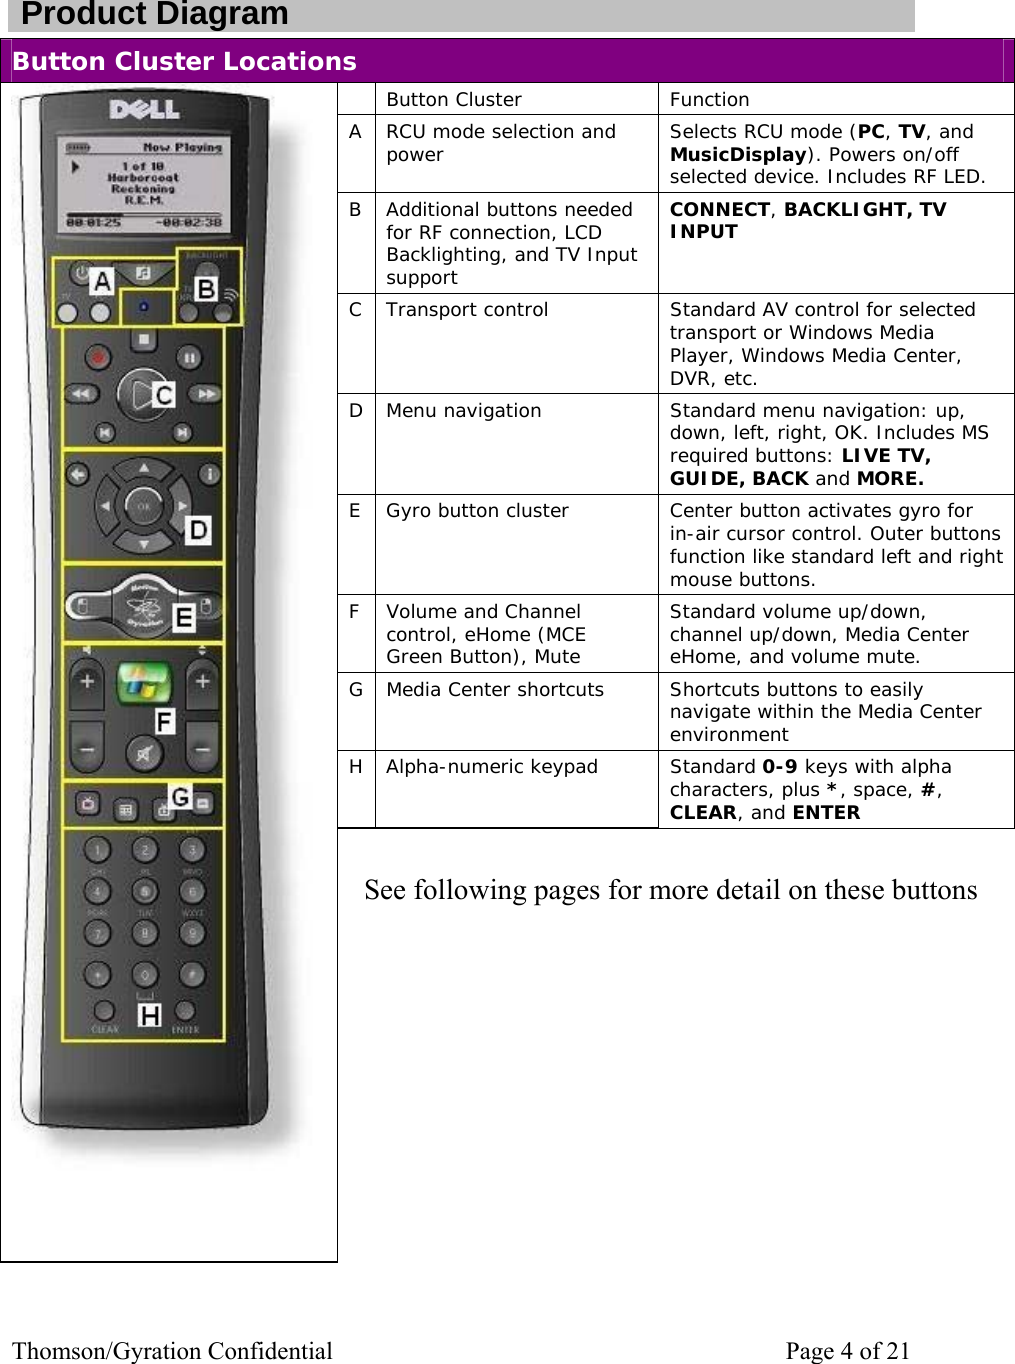 Thomson/Gyration Confidential    Page 4 of 21   Product Diagram Button Cluster Locations  Button Cluster    Function A  RCU mode selection and power  Selects RCU mode (PC, TV, and MusicDisplay). Powers on/off selected device. Includes RF LED. B  Additional buttons needed for RF connection, LCD Backlighting, and TV Input support CONNECT, BACKLIGHT, TV INPUT C  Transport control  Standard AV control for selected transport or Windows Media Player, Windows Media Center,  DVR, etc. D  Menu navigation  Standard menu navigation: up, down, left, right, OK. Includes MS required buttons: LIVE TV, GUIDE, BACK and MORE. E  Gyro button cluster  Center button activates gyro for in-air cursor control. Outer buttons function like standard left and right mouse buttons.  F Volume and Channel control, eHome (MCE Green Button), Mute Standard volume up/down, channel up/down, Media Center eHome, and volume mute. G  Media Center shortcuts  Shortcuts buttons to easily navigate within the Media Center environment H Alpha-numeric keypad  Standard 0-9 keys with alpha characters, plus *, space, #, CLEAR, and ENTER                         See following pages for more detail on these buttons 